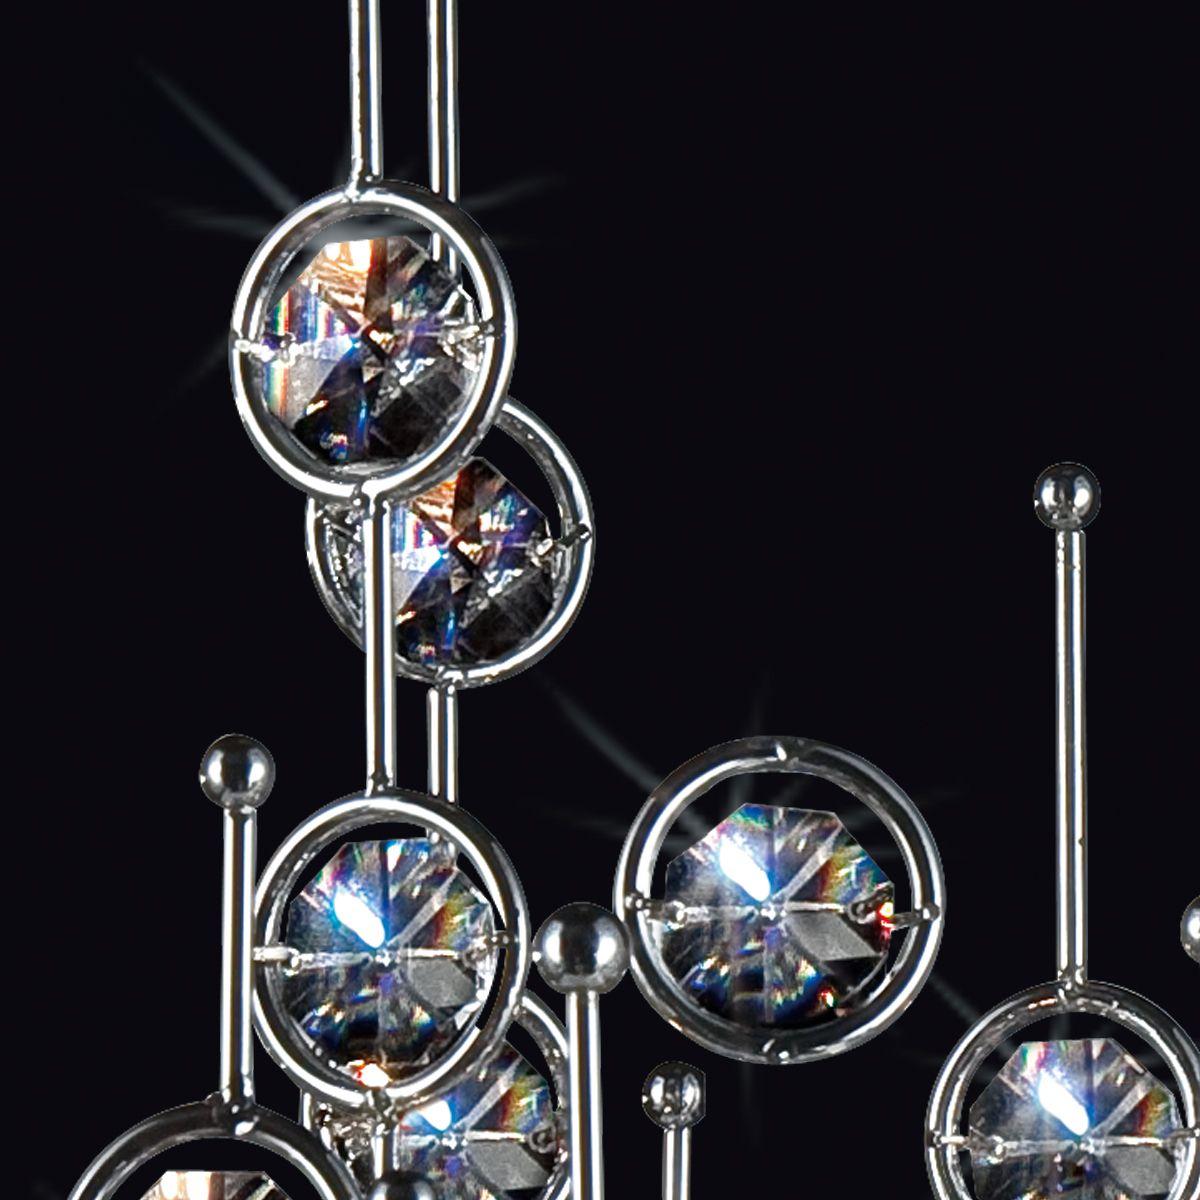 Vice 17 in. 6 Lights Chandelier Chrome Finish